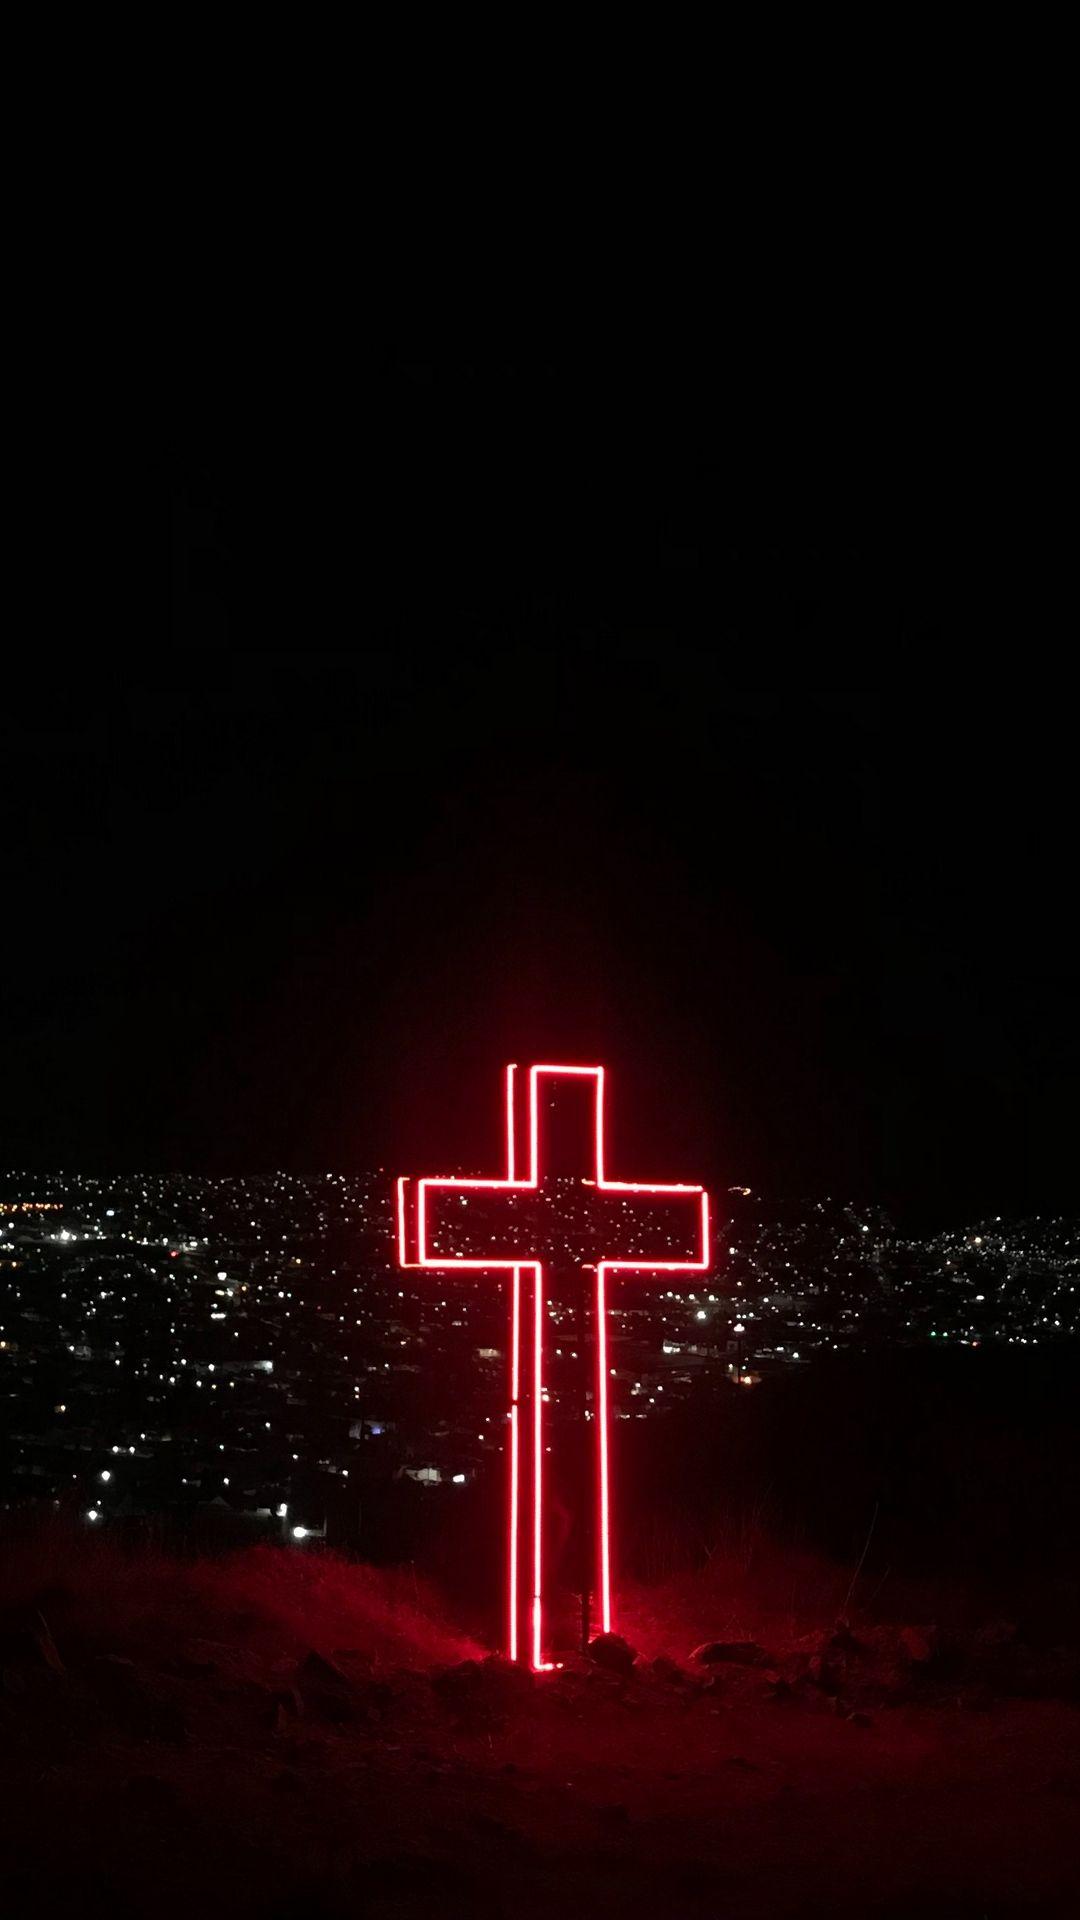 A red cross on top of the hill at night - Christian, cross